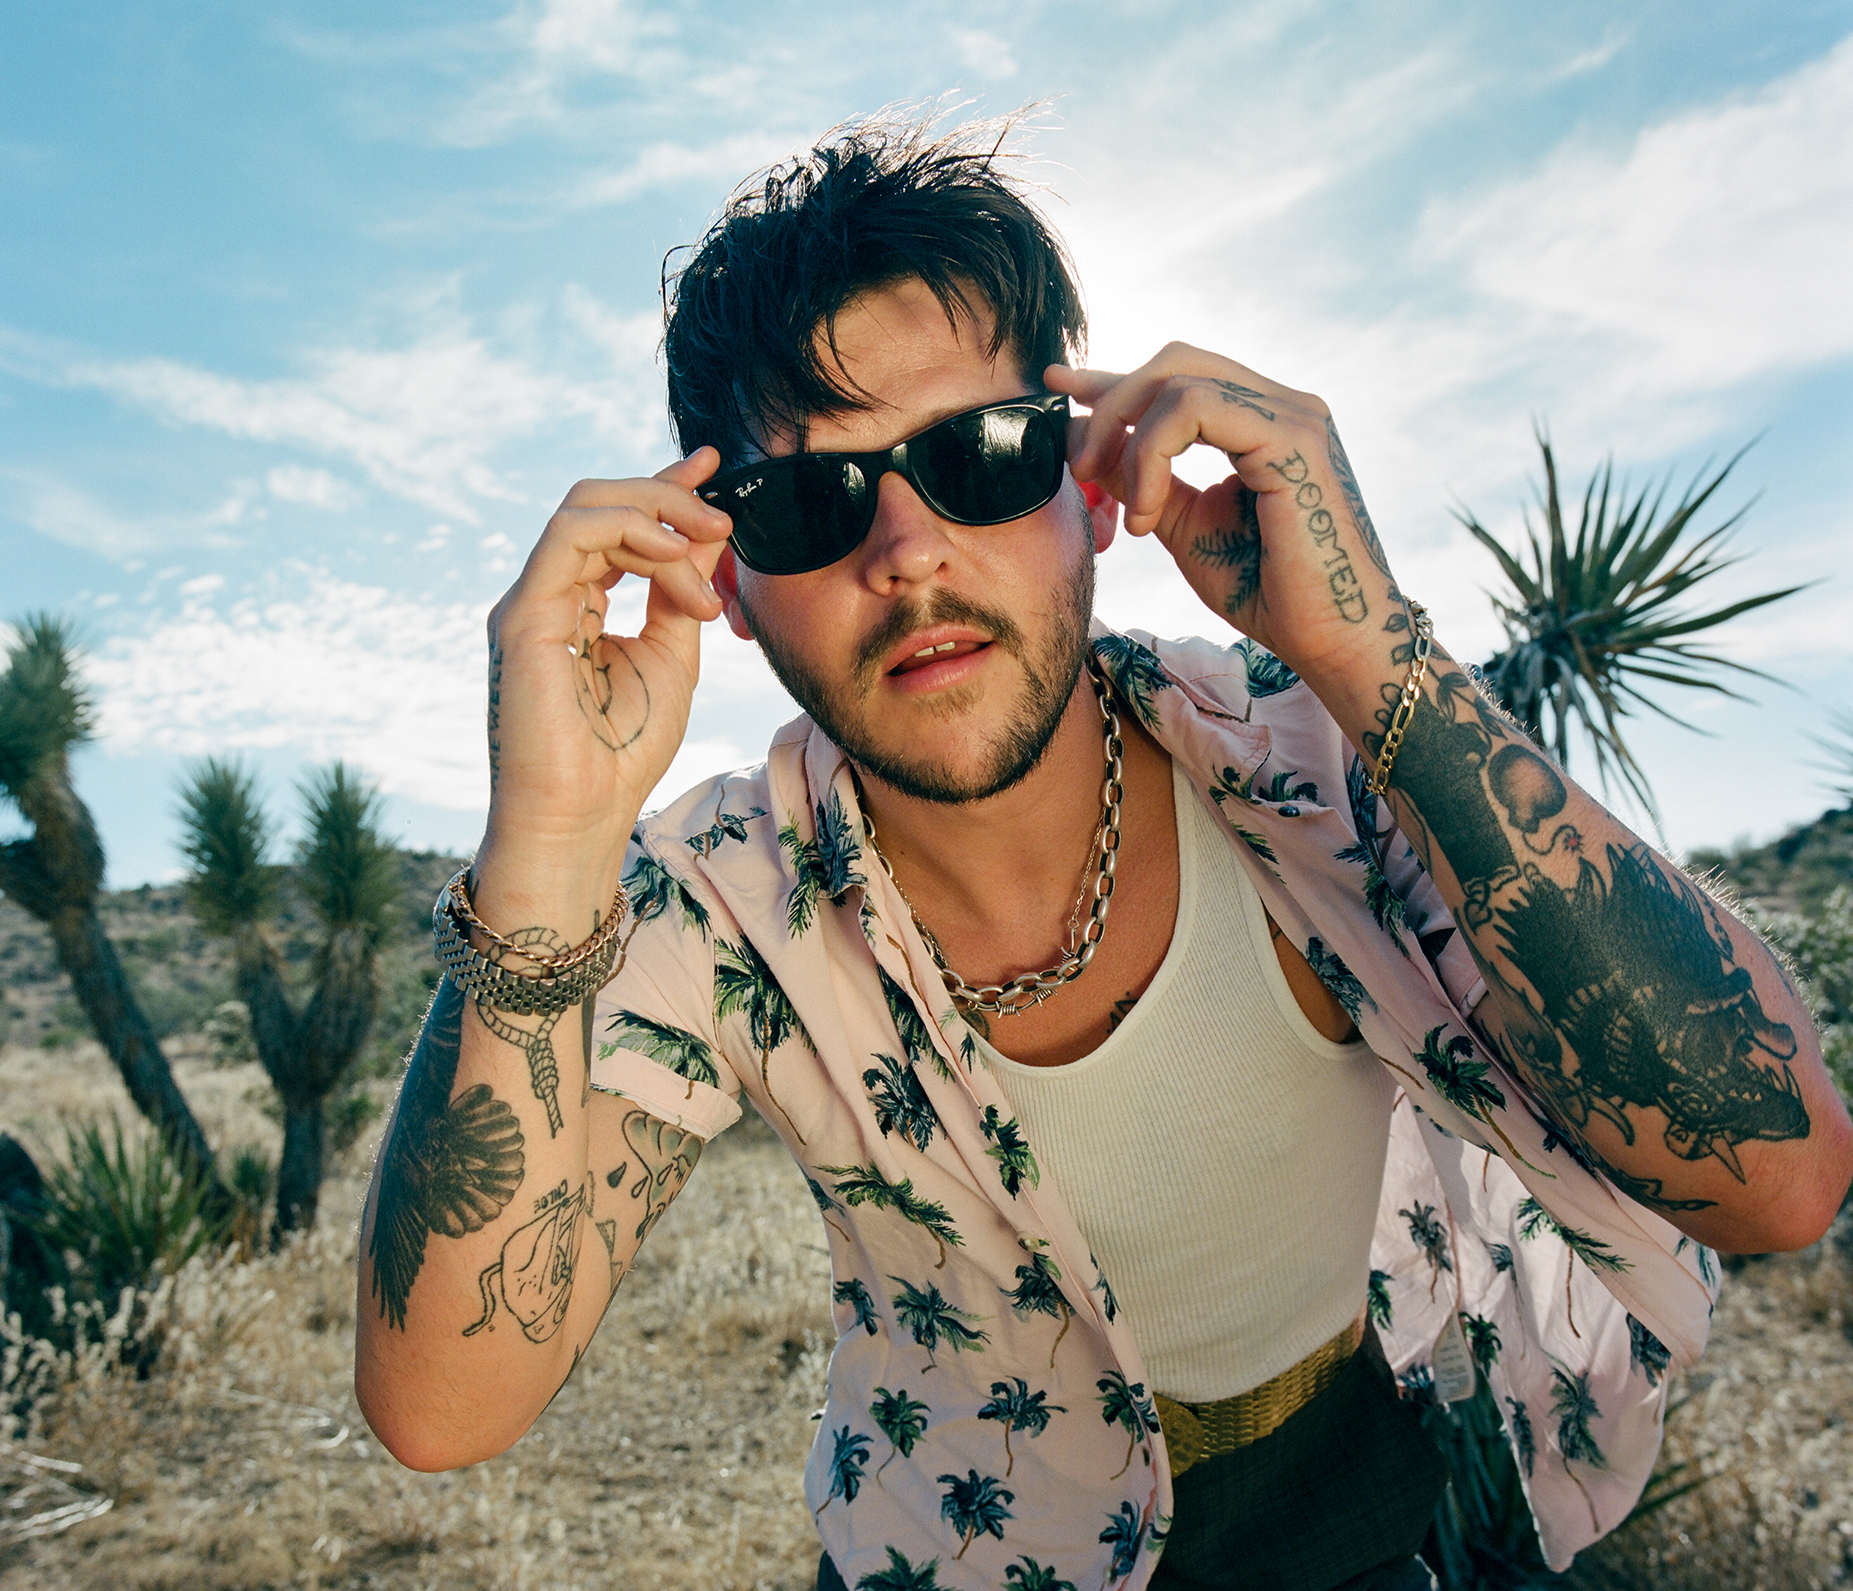 WAVVES announce new album, 'Hideaway' - out July 16th - Hear the first single 'Help Is On The Way' 2